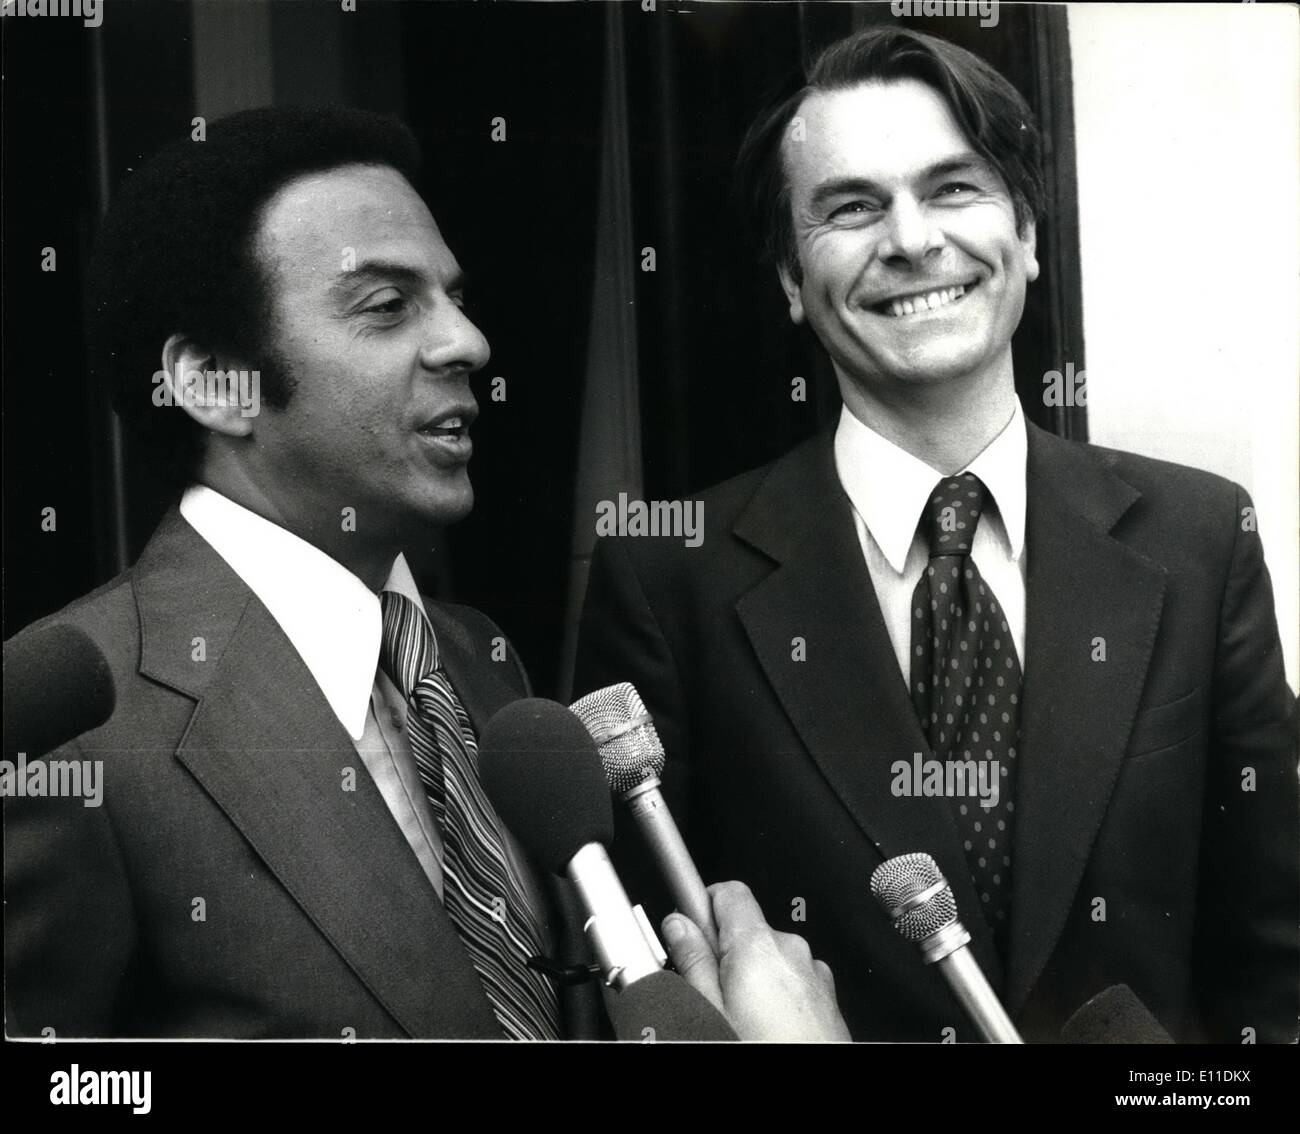 May 05, 1977 - Andrew young the American ambassador to the U.N. calls on Dr Owen for breakfast: Mr. Andrew Young the American Ambassador to the United Nations, met Dr David Owen the Foreign Secretary over breakfast, at his official residents No 1 Carlton Gardens-He has just arrived back from an eight Nation tour of Africa. Photo shows Dr David Owen and Andrew Young seen after their working Breakfast at the official residents of the Foreign Secretary. No 1Carlton Gardens. Stock Photo